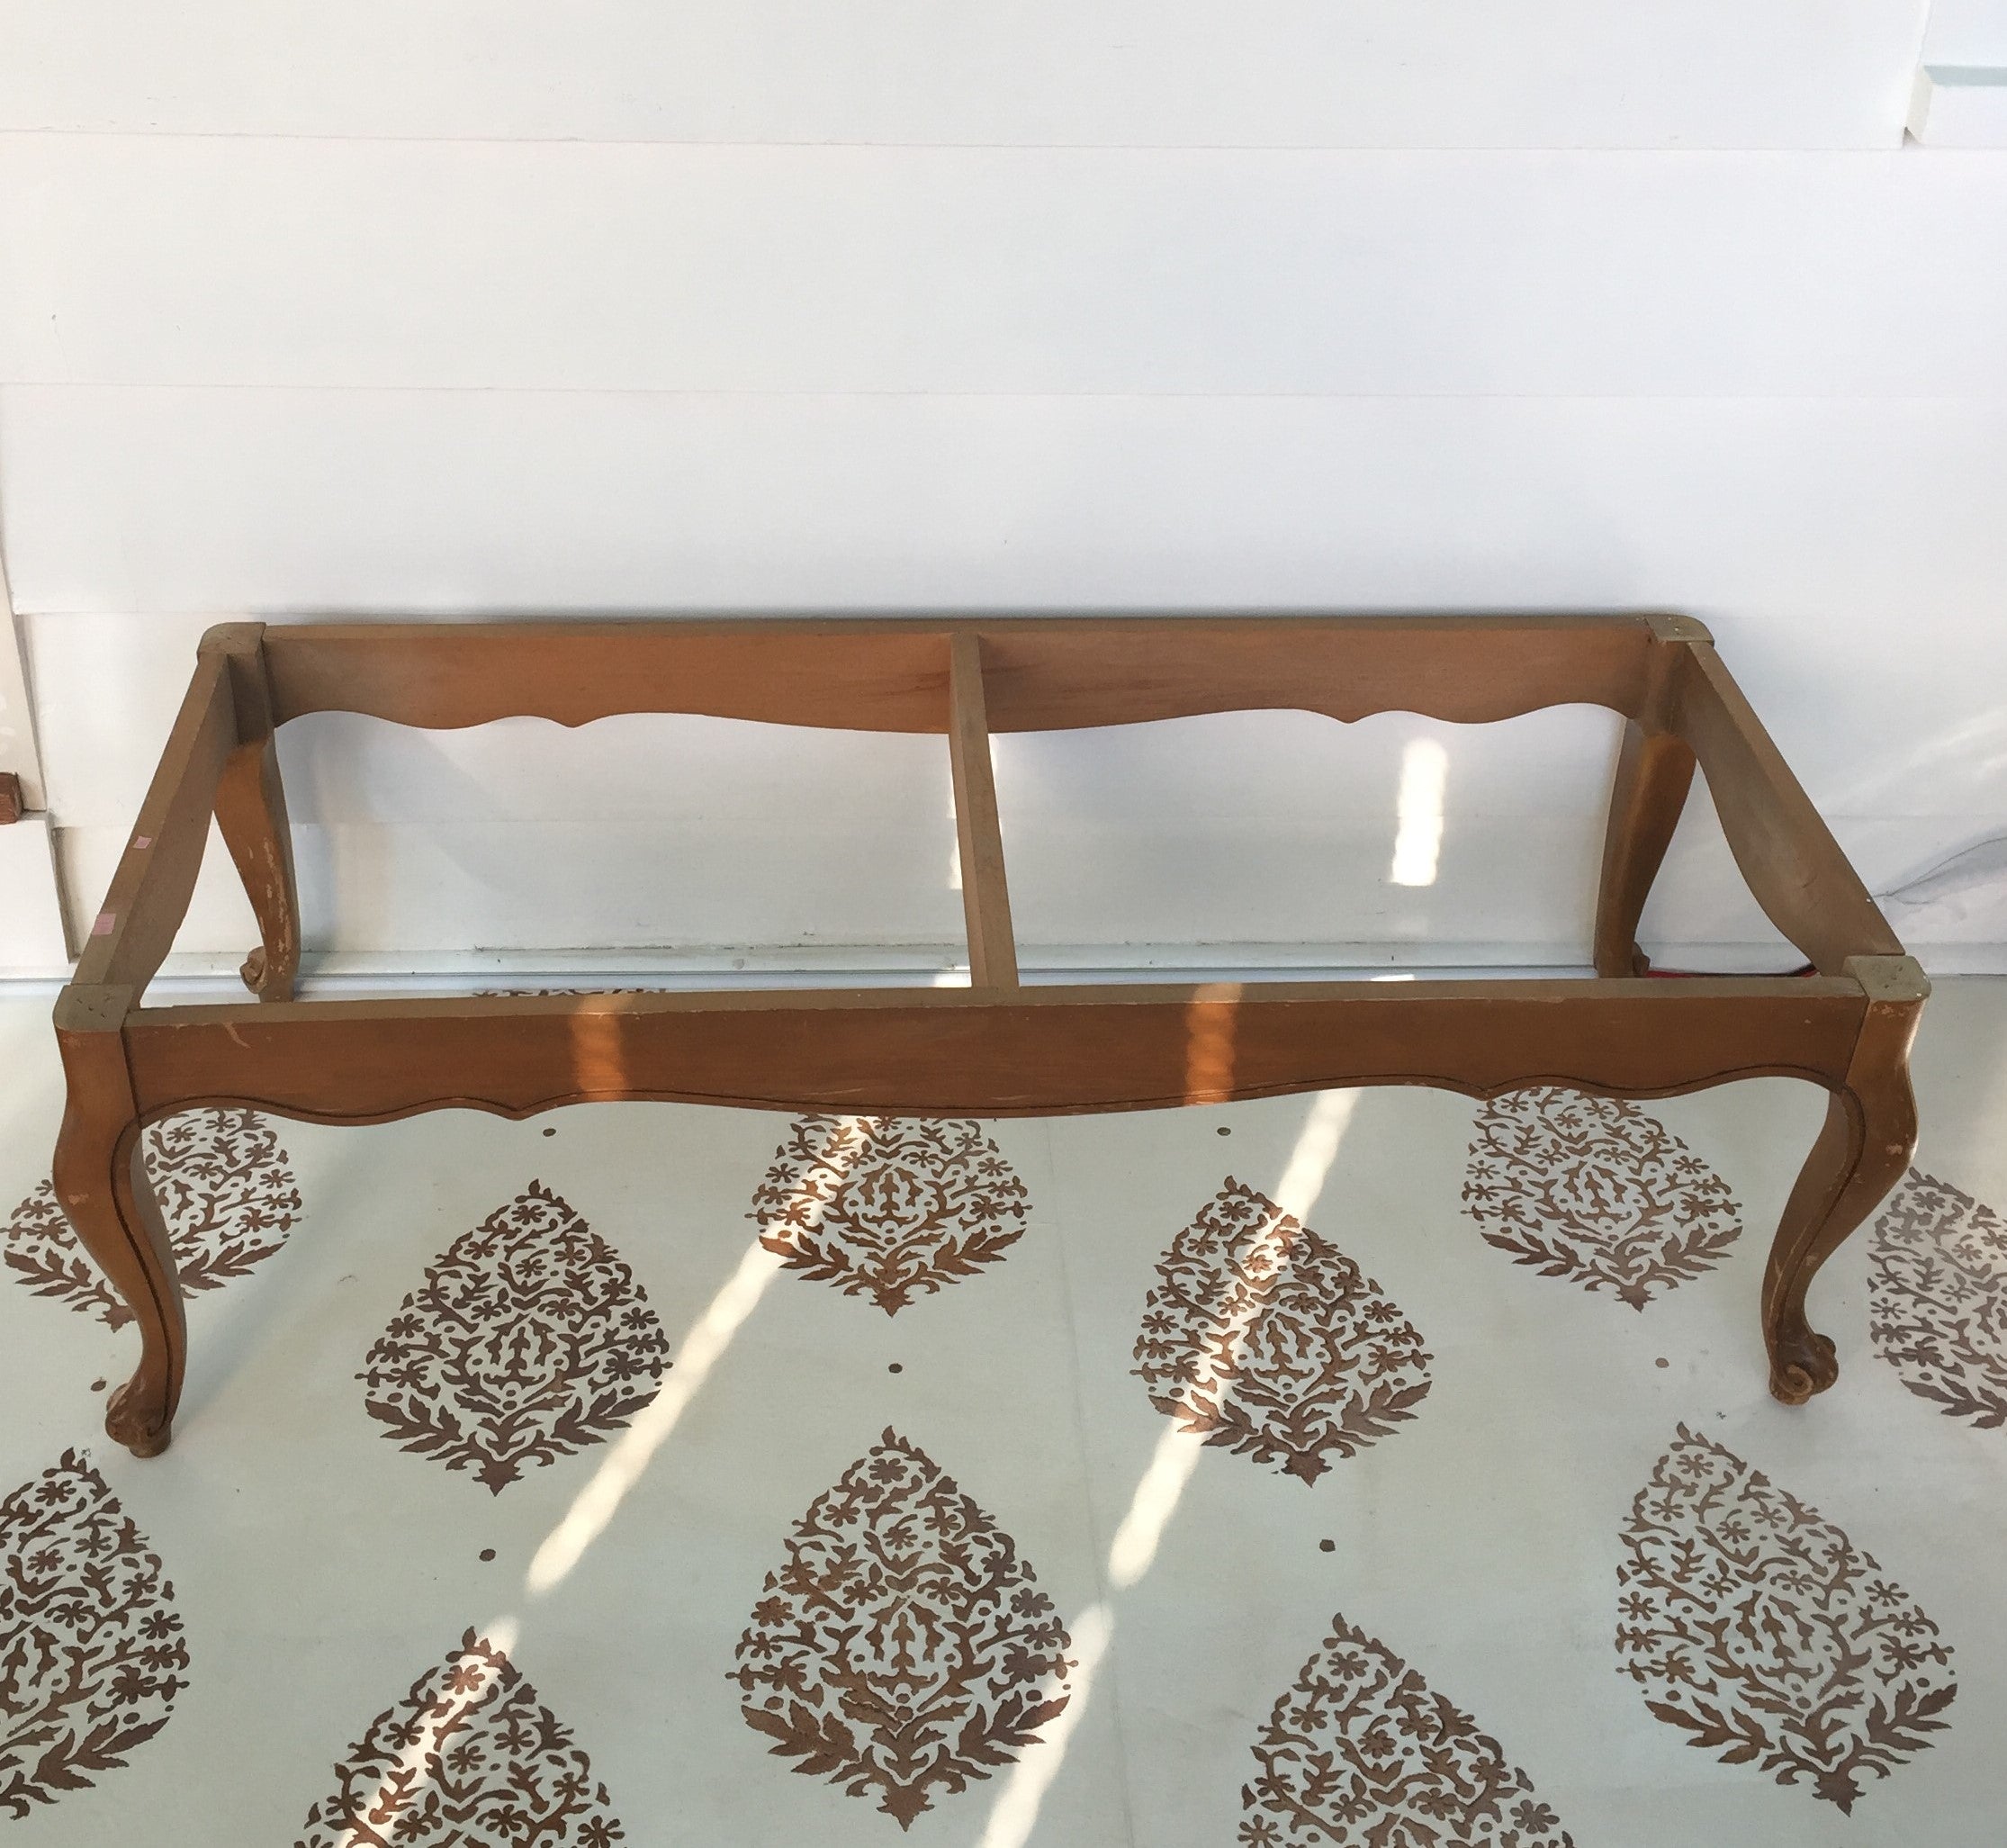 Vintage French Country Bench